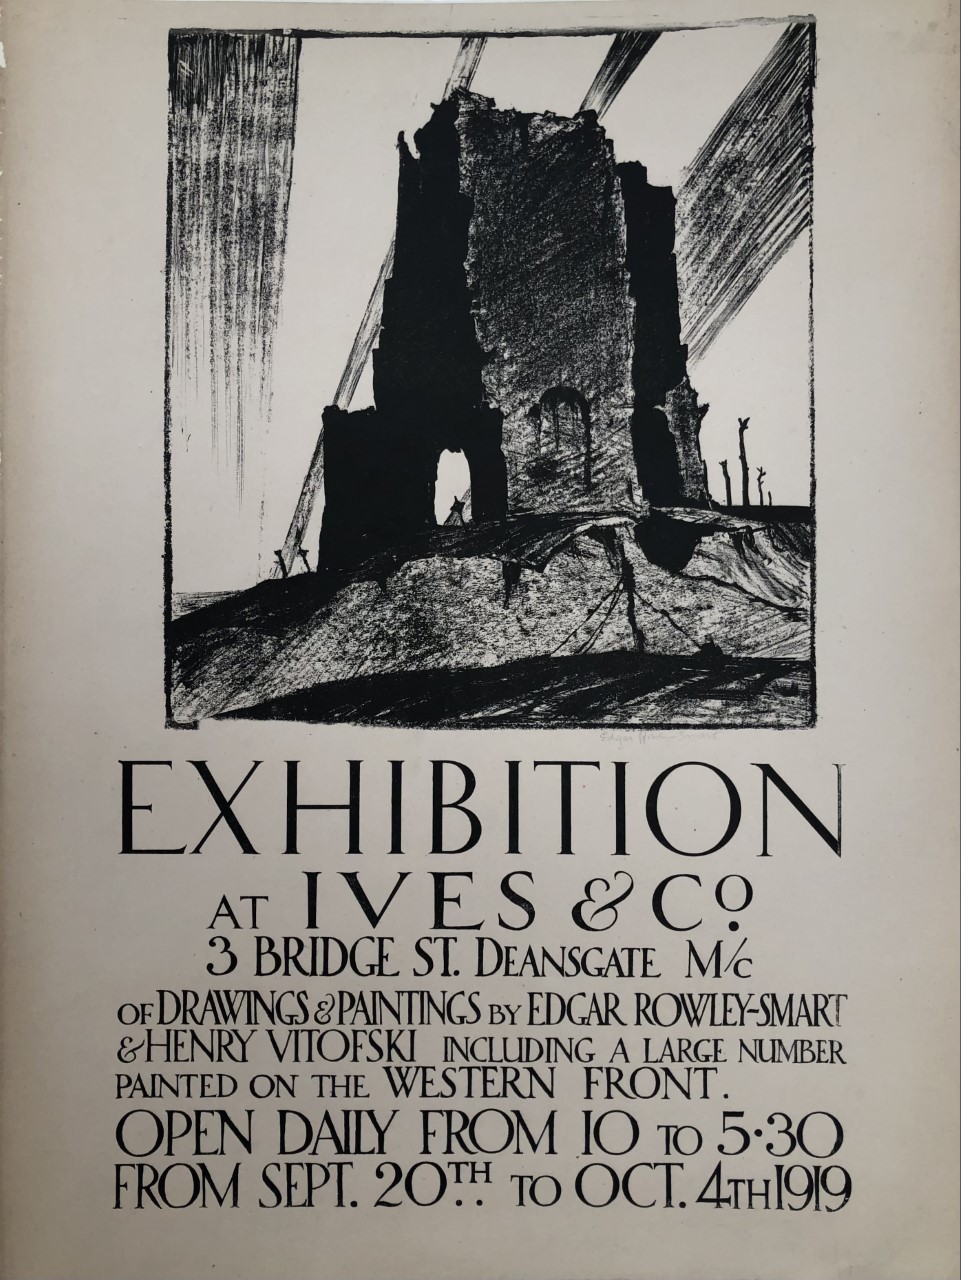 Exhibition at Ives & Co., 3 Bridge Street, Deansgate, M/c, of Drawings and Paintings by Edgar Rowley-Smart and Henry Vitofski